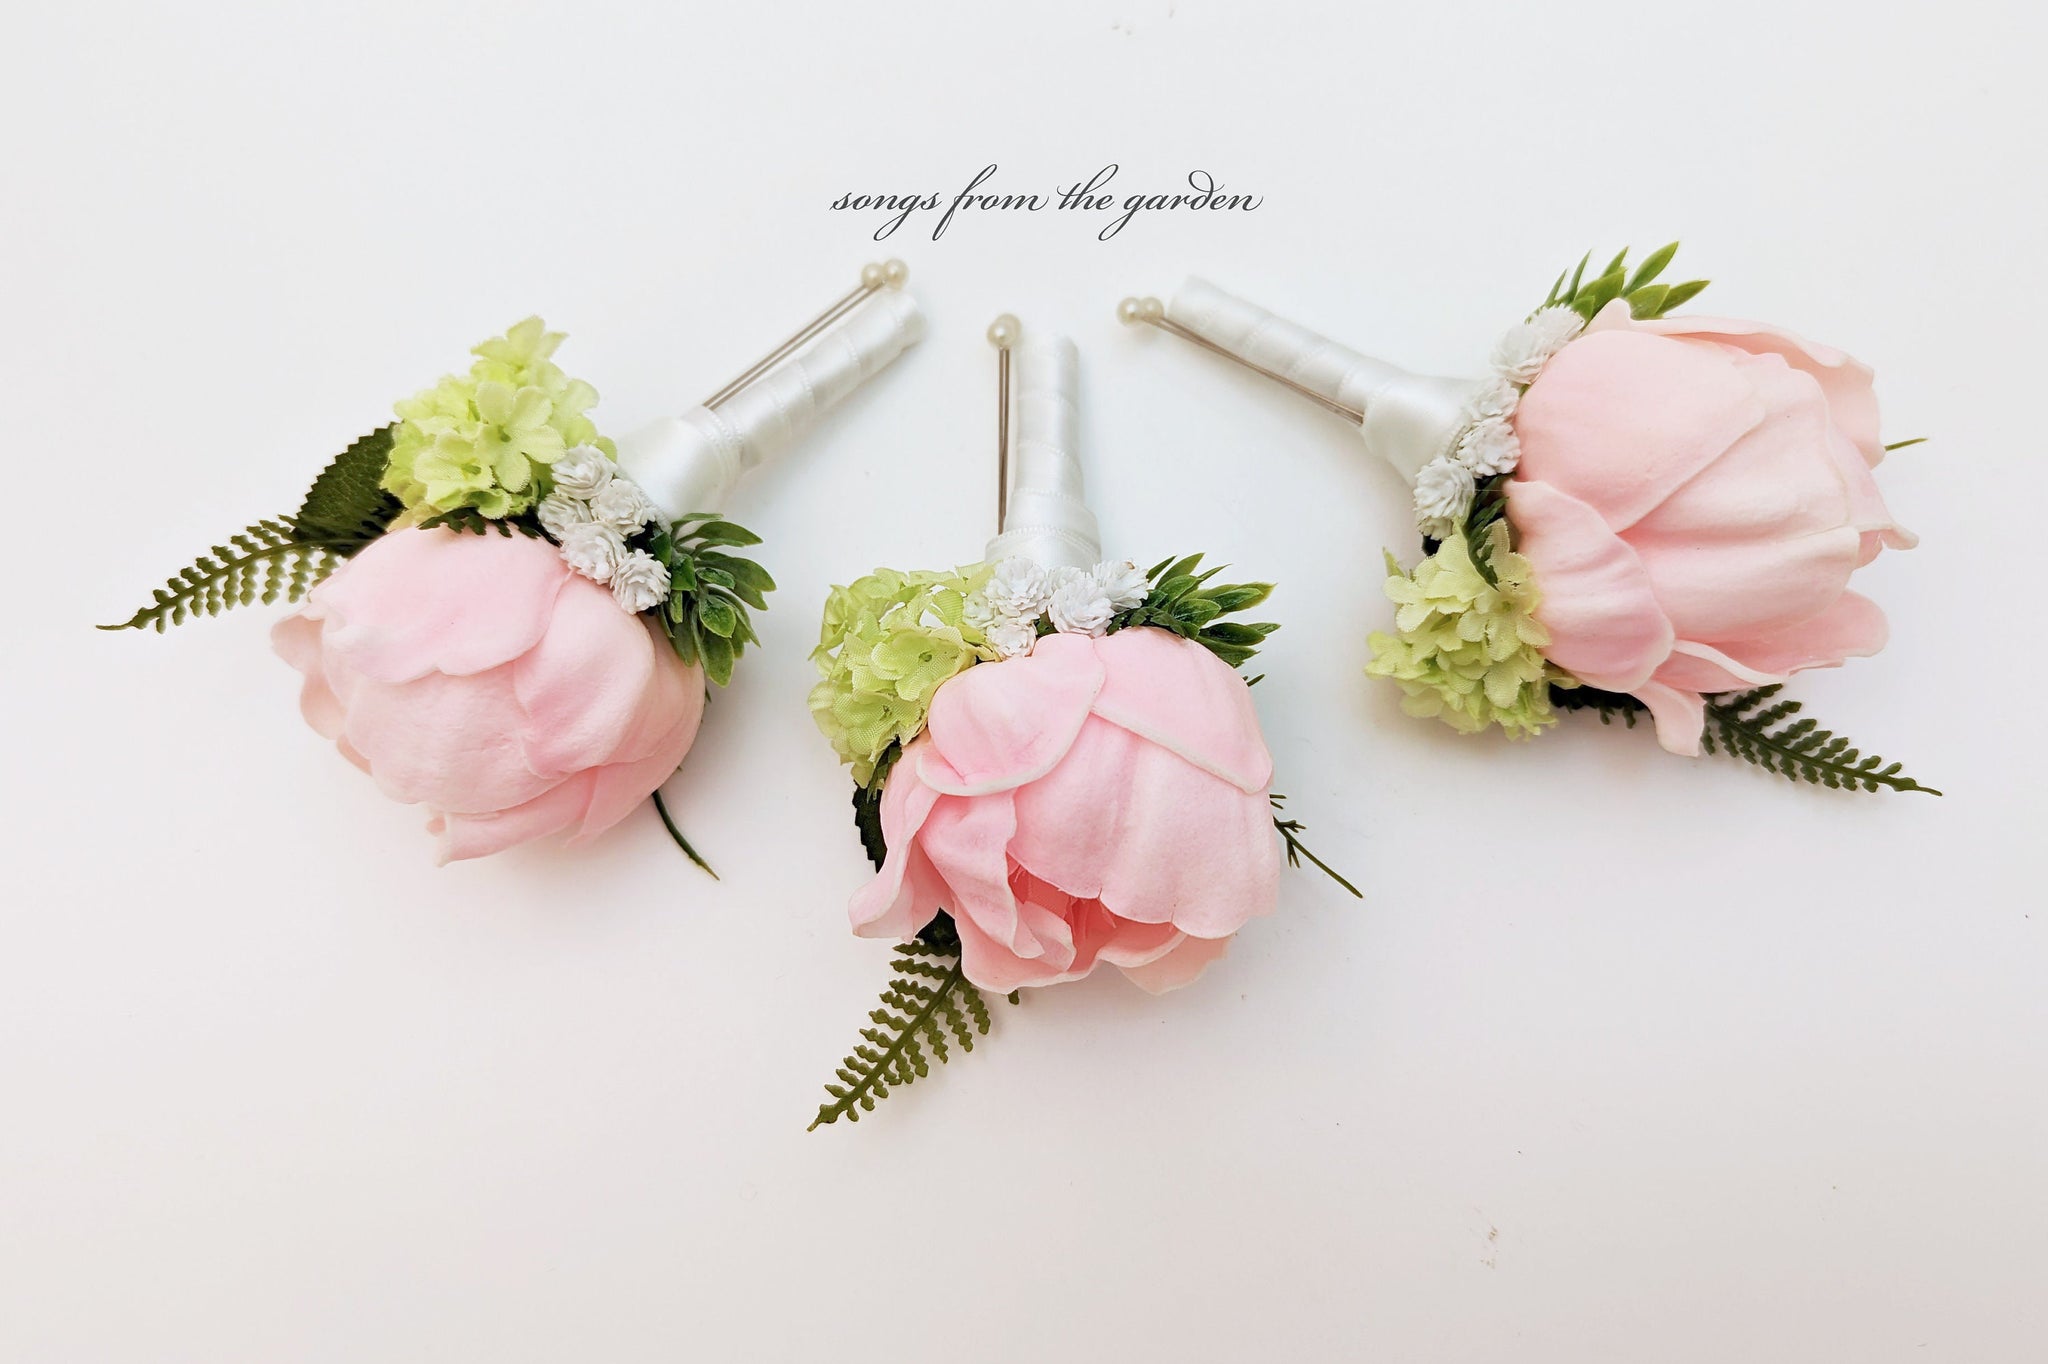 Pink Peony Boutonniere or Corsage - Hops Viburnunam Baby's Breath Accents -  Groom Groomsmen Boutonnieres Wedding Prom Homecoming Corsage